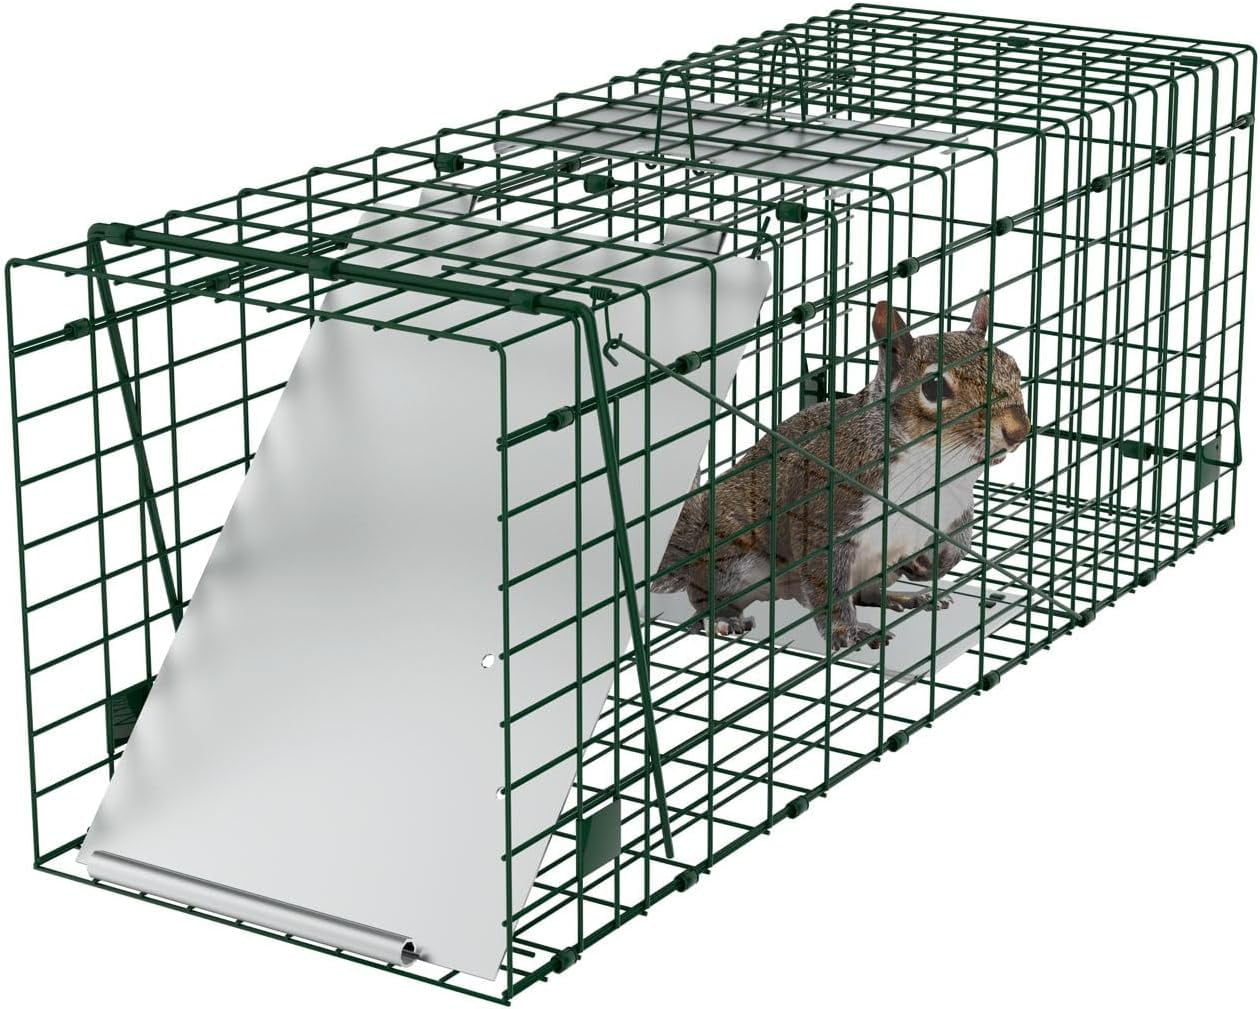 Victor Humane Catch-and-Hold Multiple-Catch No-Touch Outdoor and Indoor Mouse  Trap (4-Pack) M333VB4 - The Home Depot